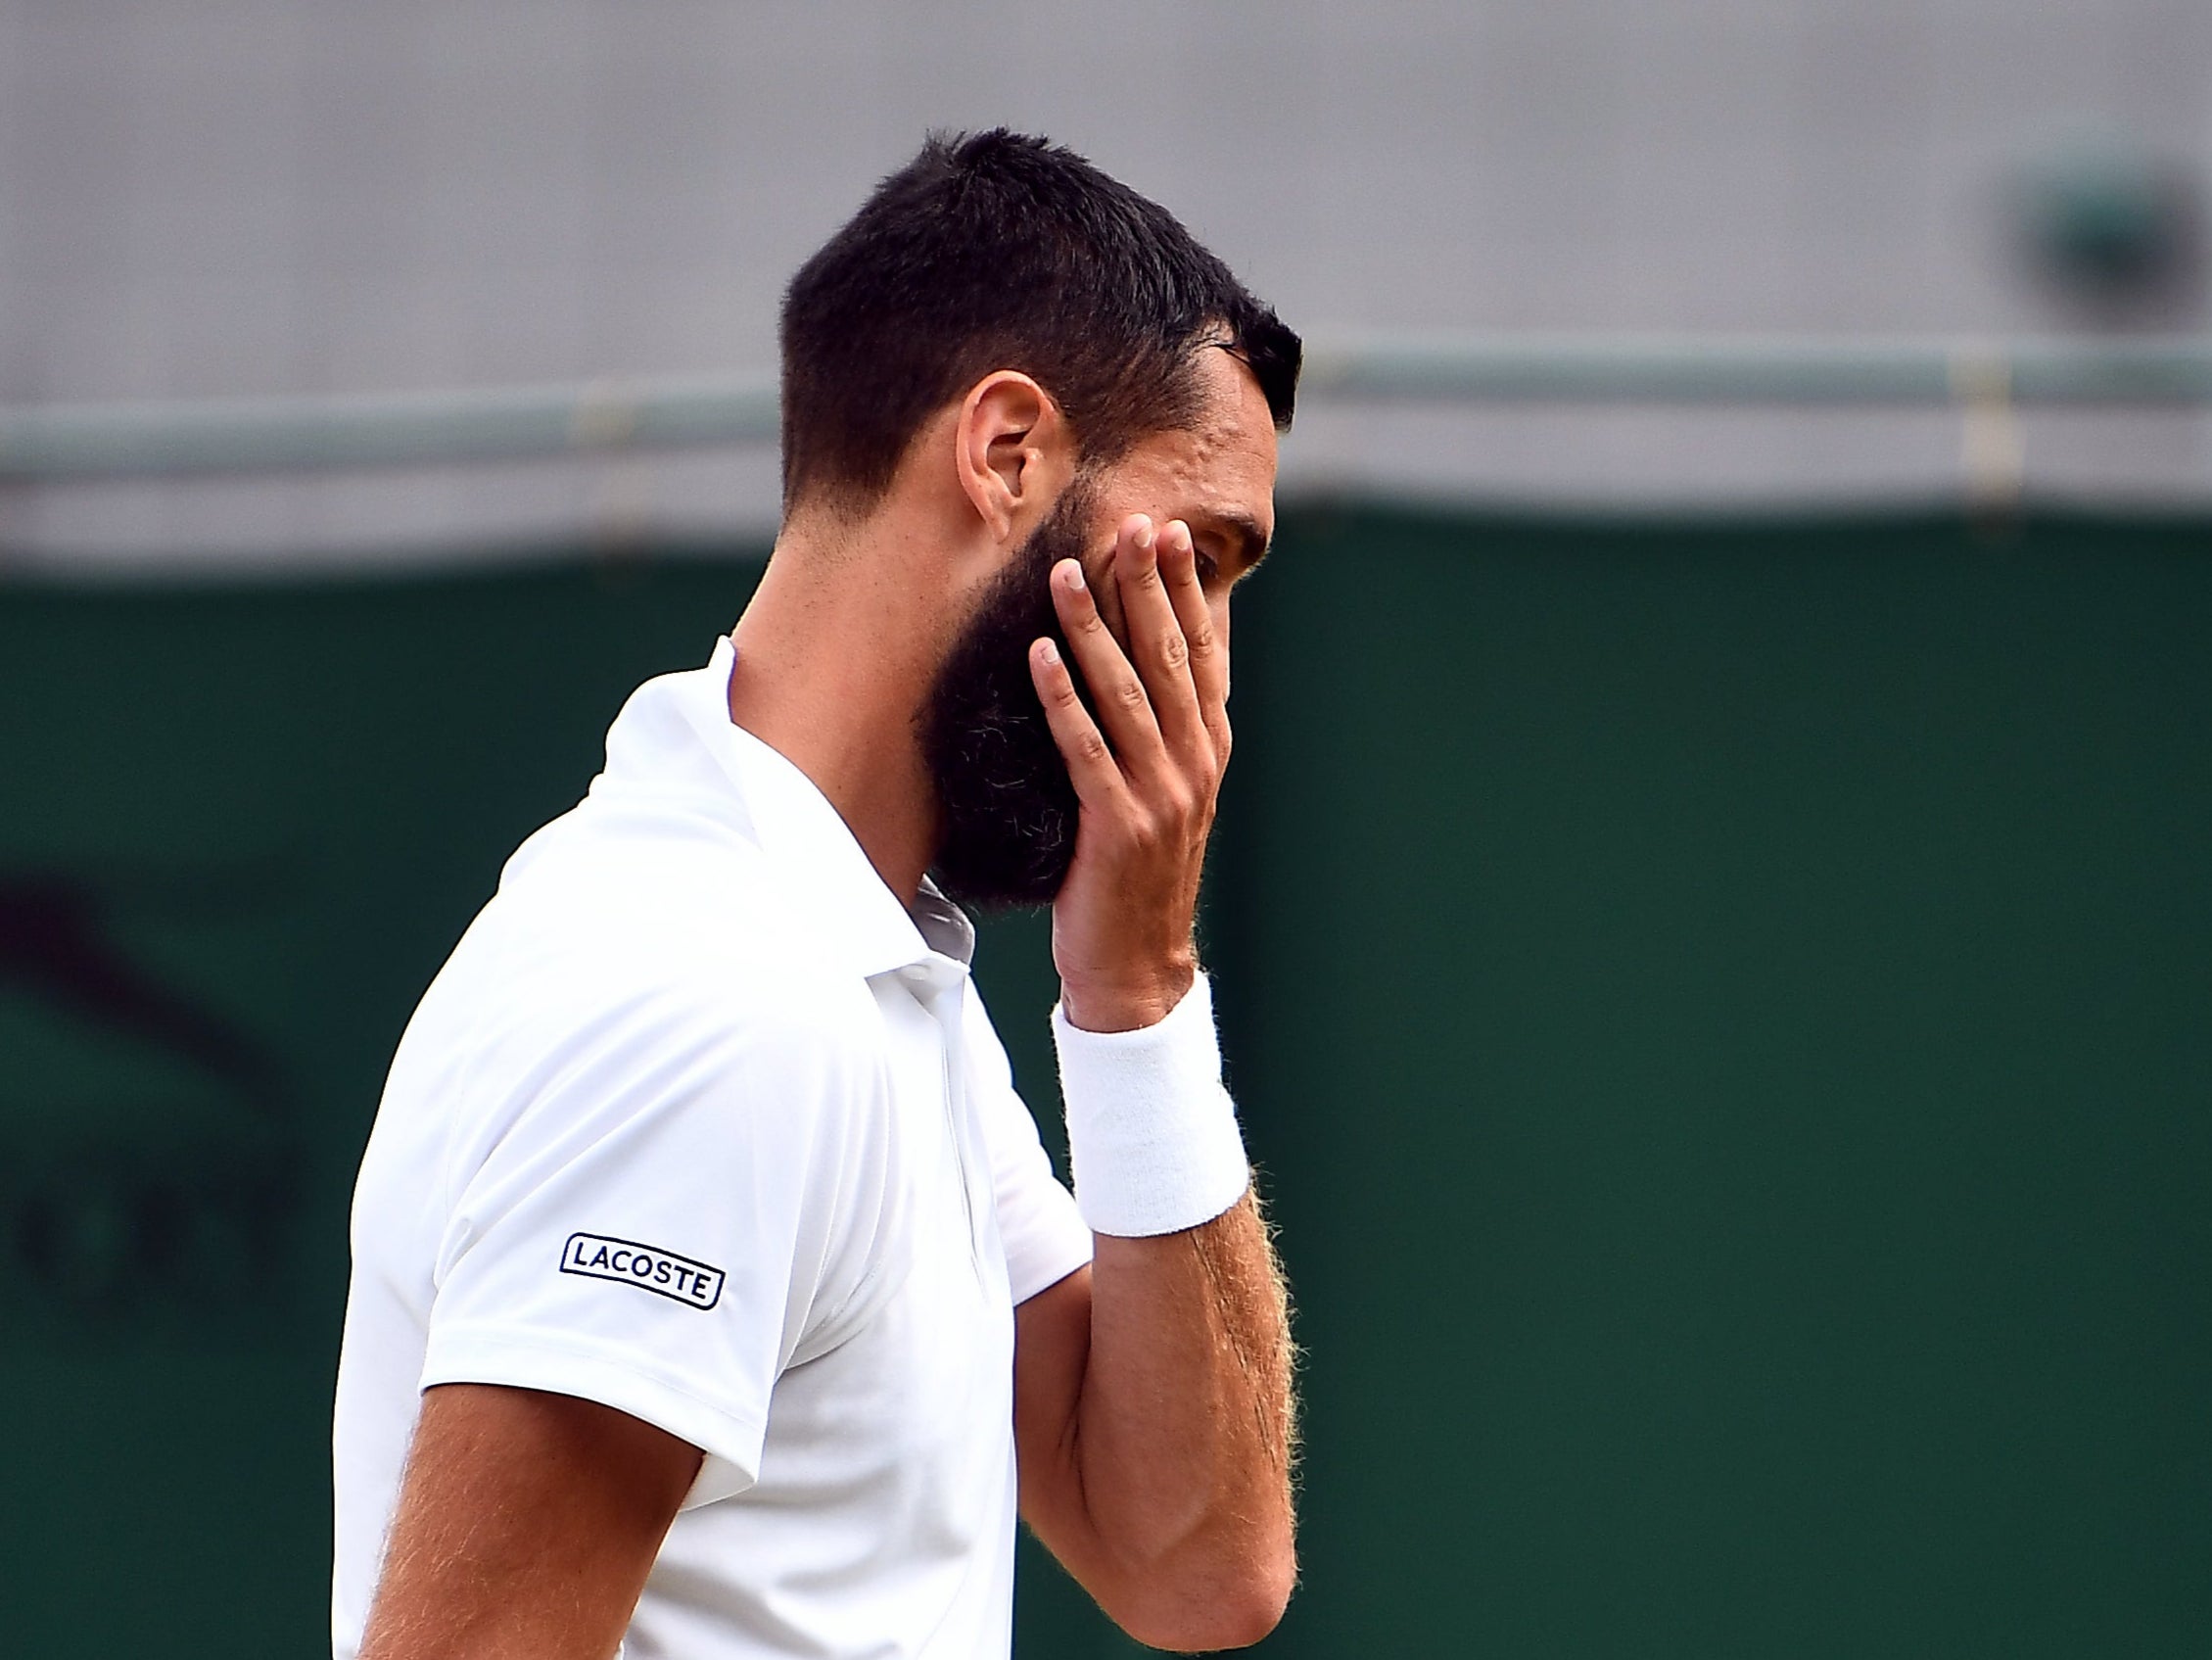 Wimbledon 2021: Benoit Paire code for lack of in defeat | The Independent